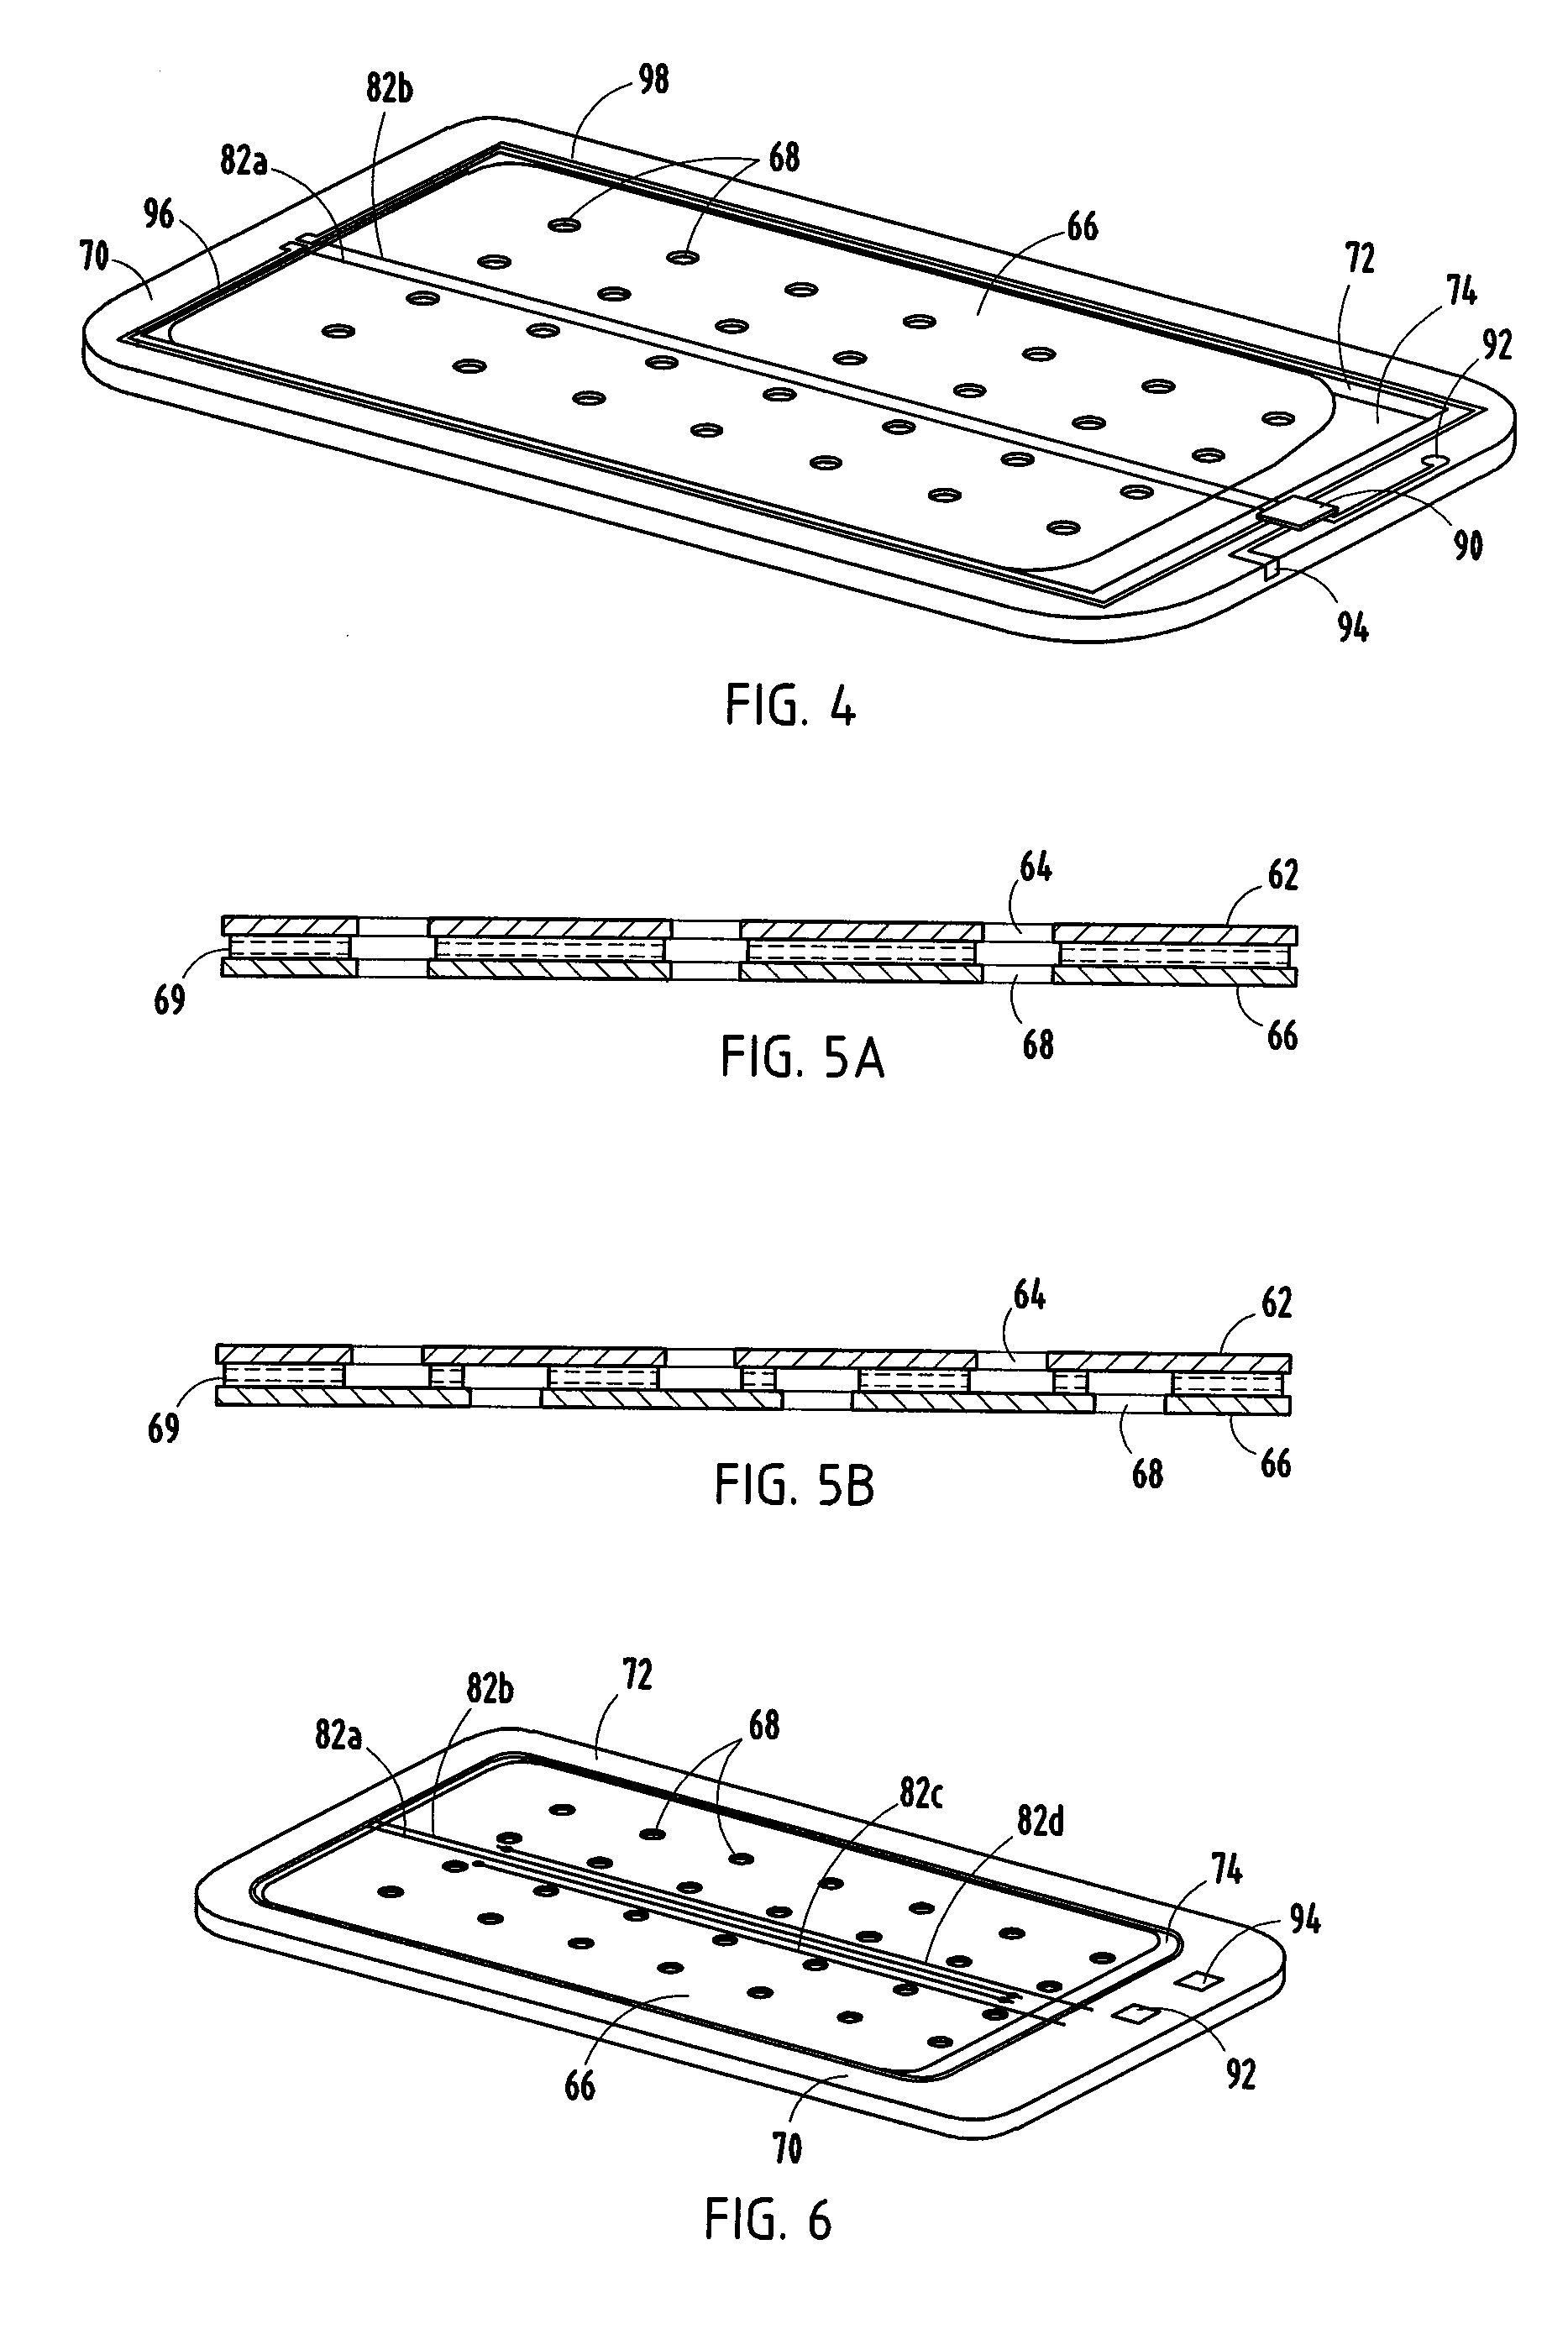 Battery Including a Fluid Manager Mounted Internal to Cell